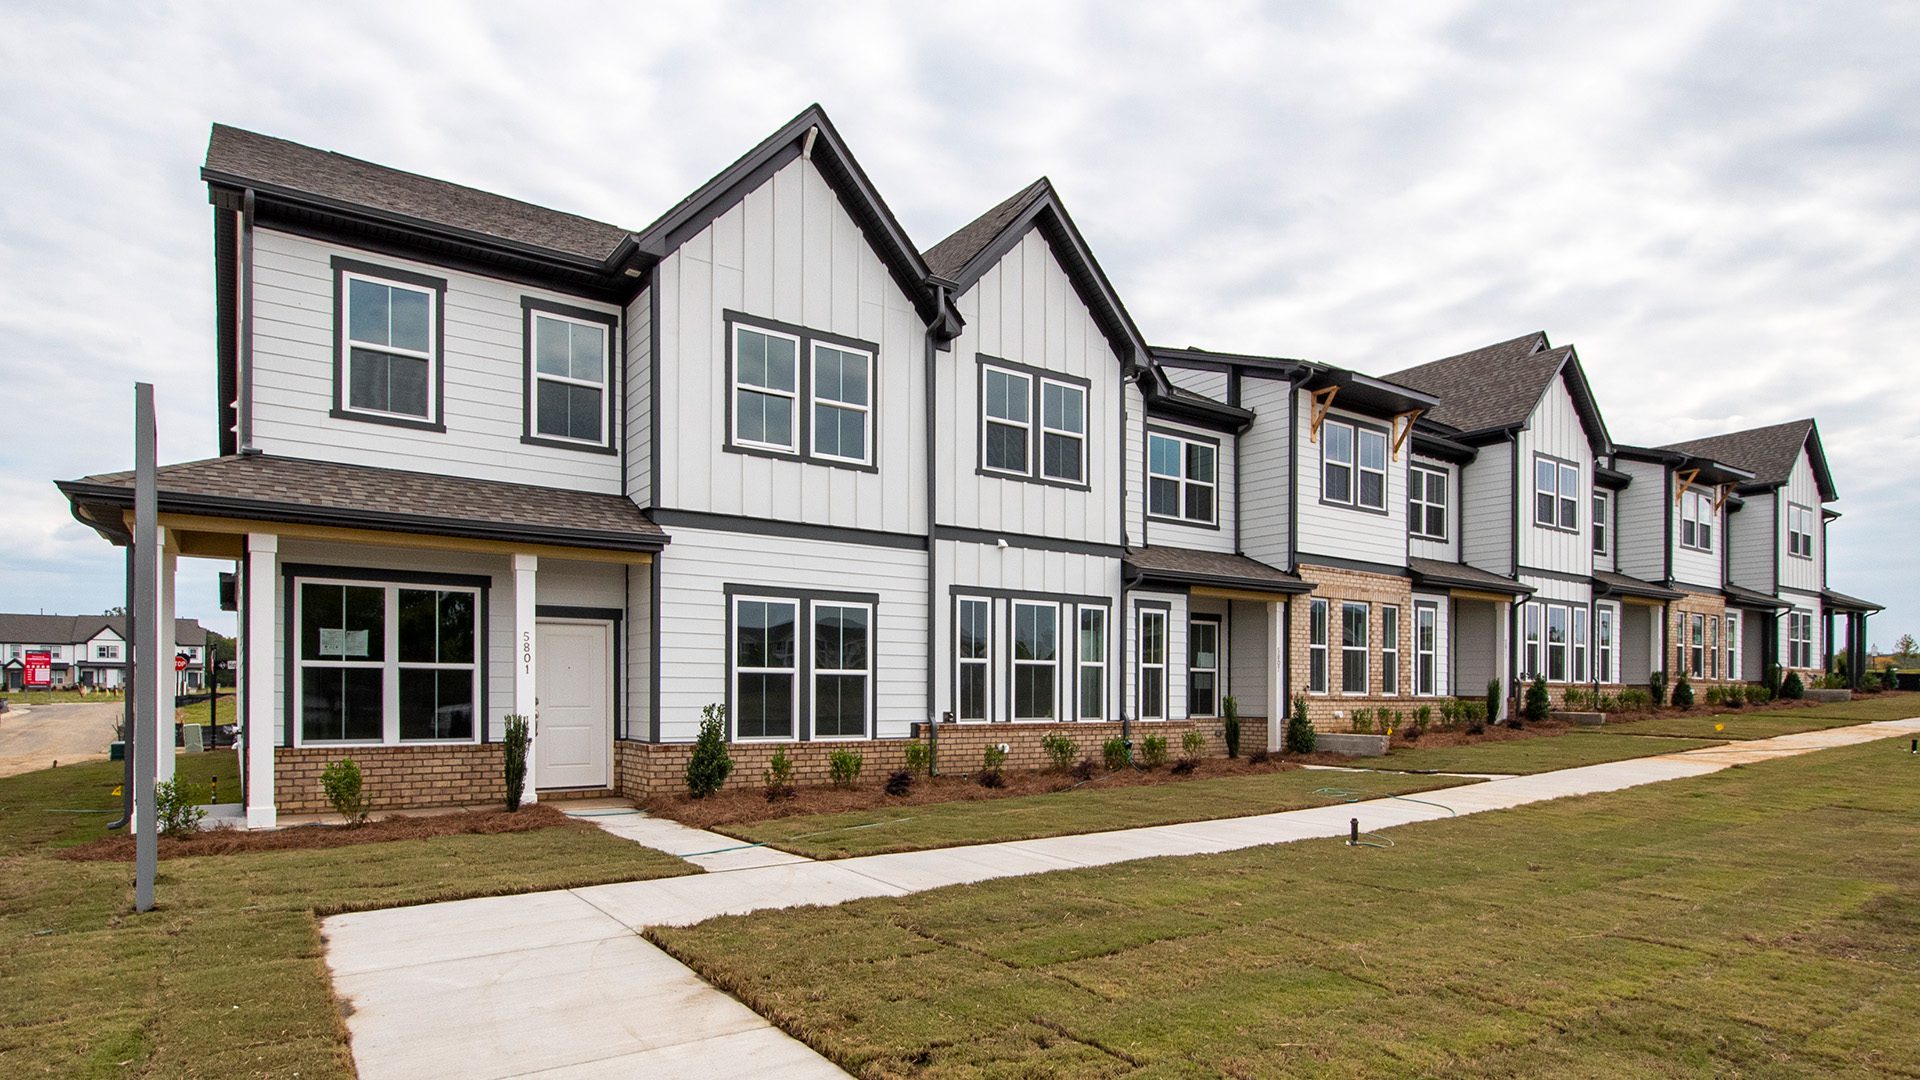 newly finished 2-story townhomes at Farmington with white siding and gray roofs